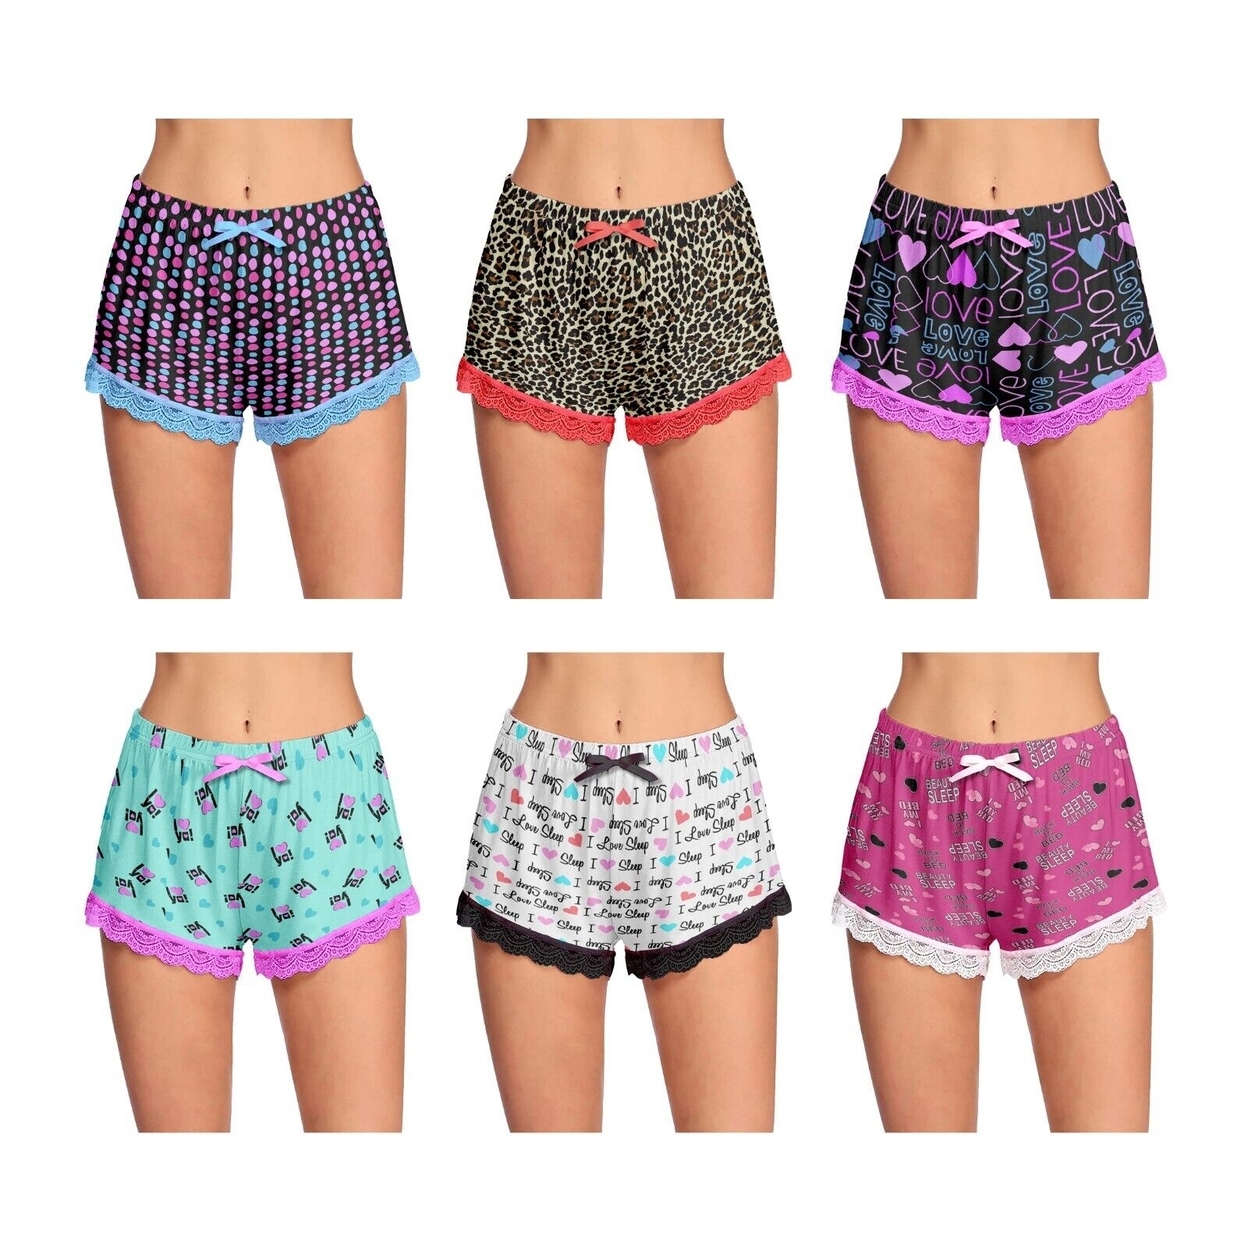 Multi-Pack: Women's Ultra-Soft Cozy Fun Printed Lace Trim Pajama Lounge Shorts - 1-pack, Large, Love